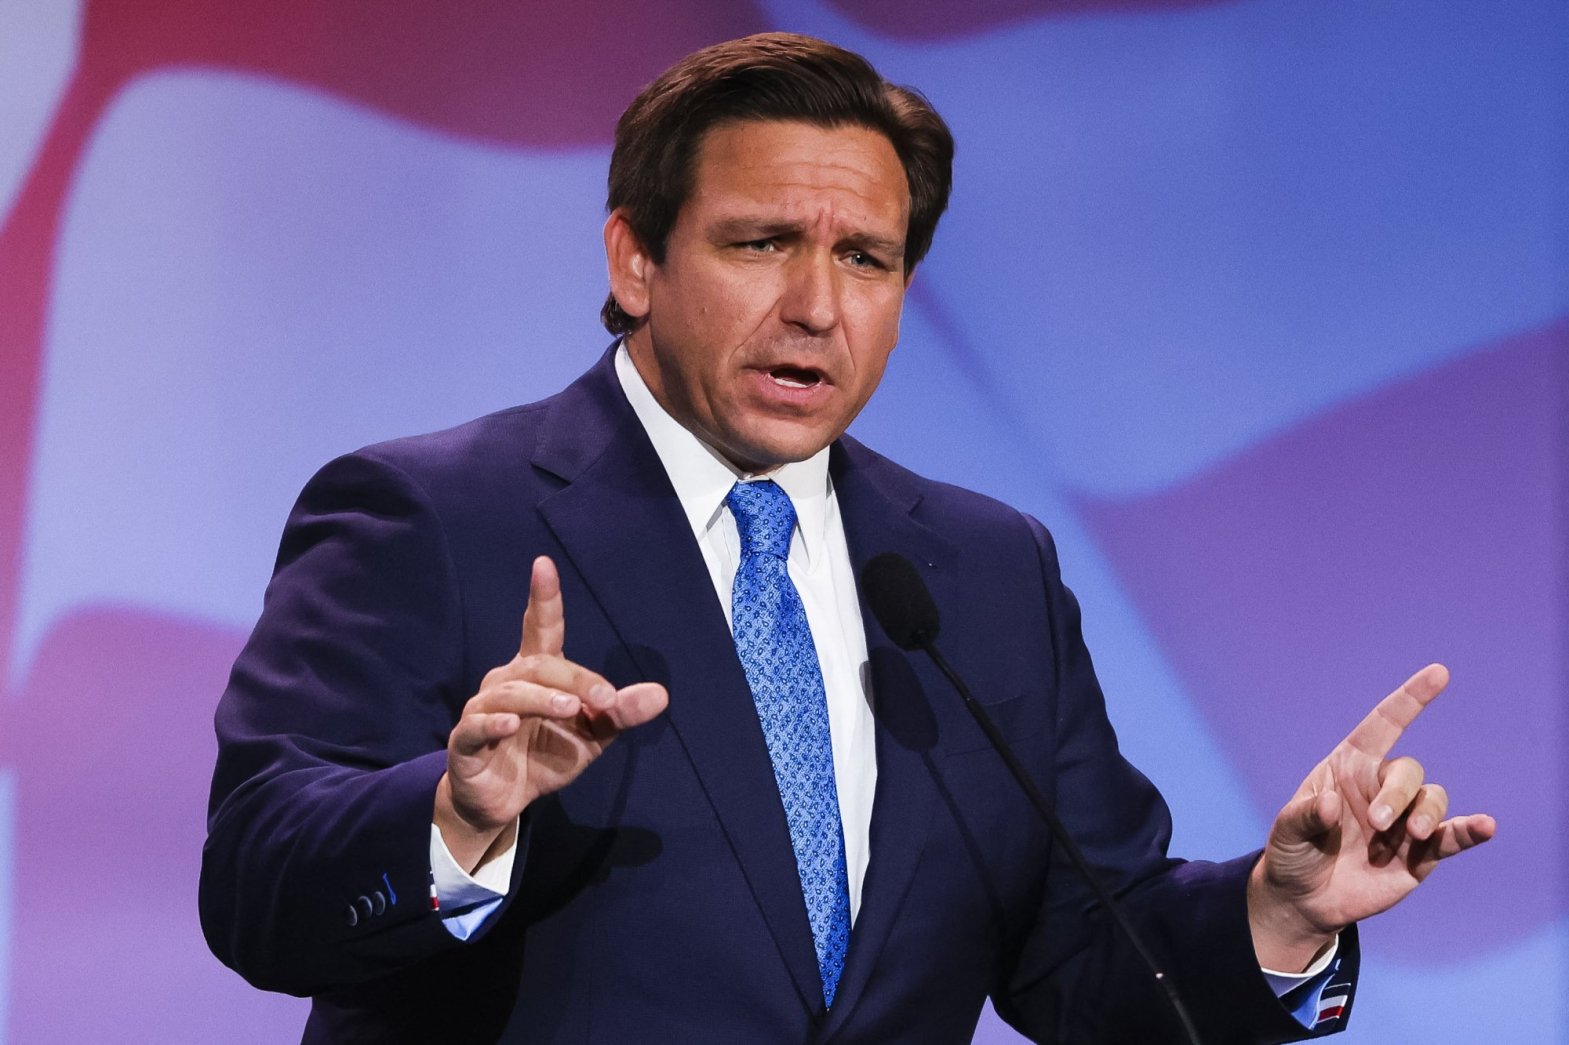 DeSantis Vows to Revamp Florida Ethics Cases, Promising to 'Revitalize the System